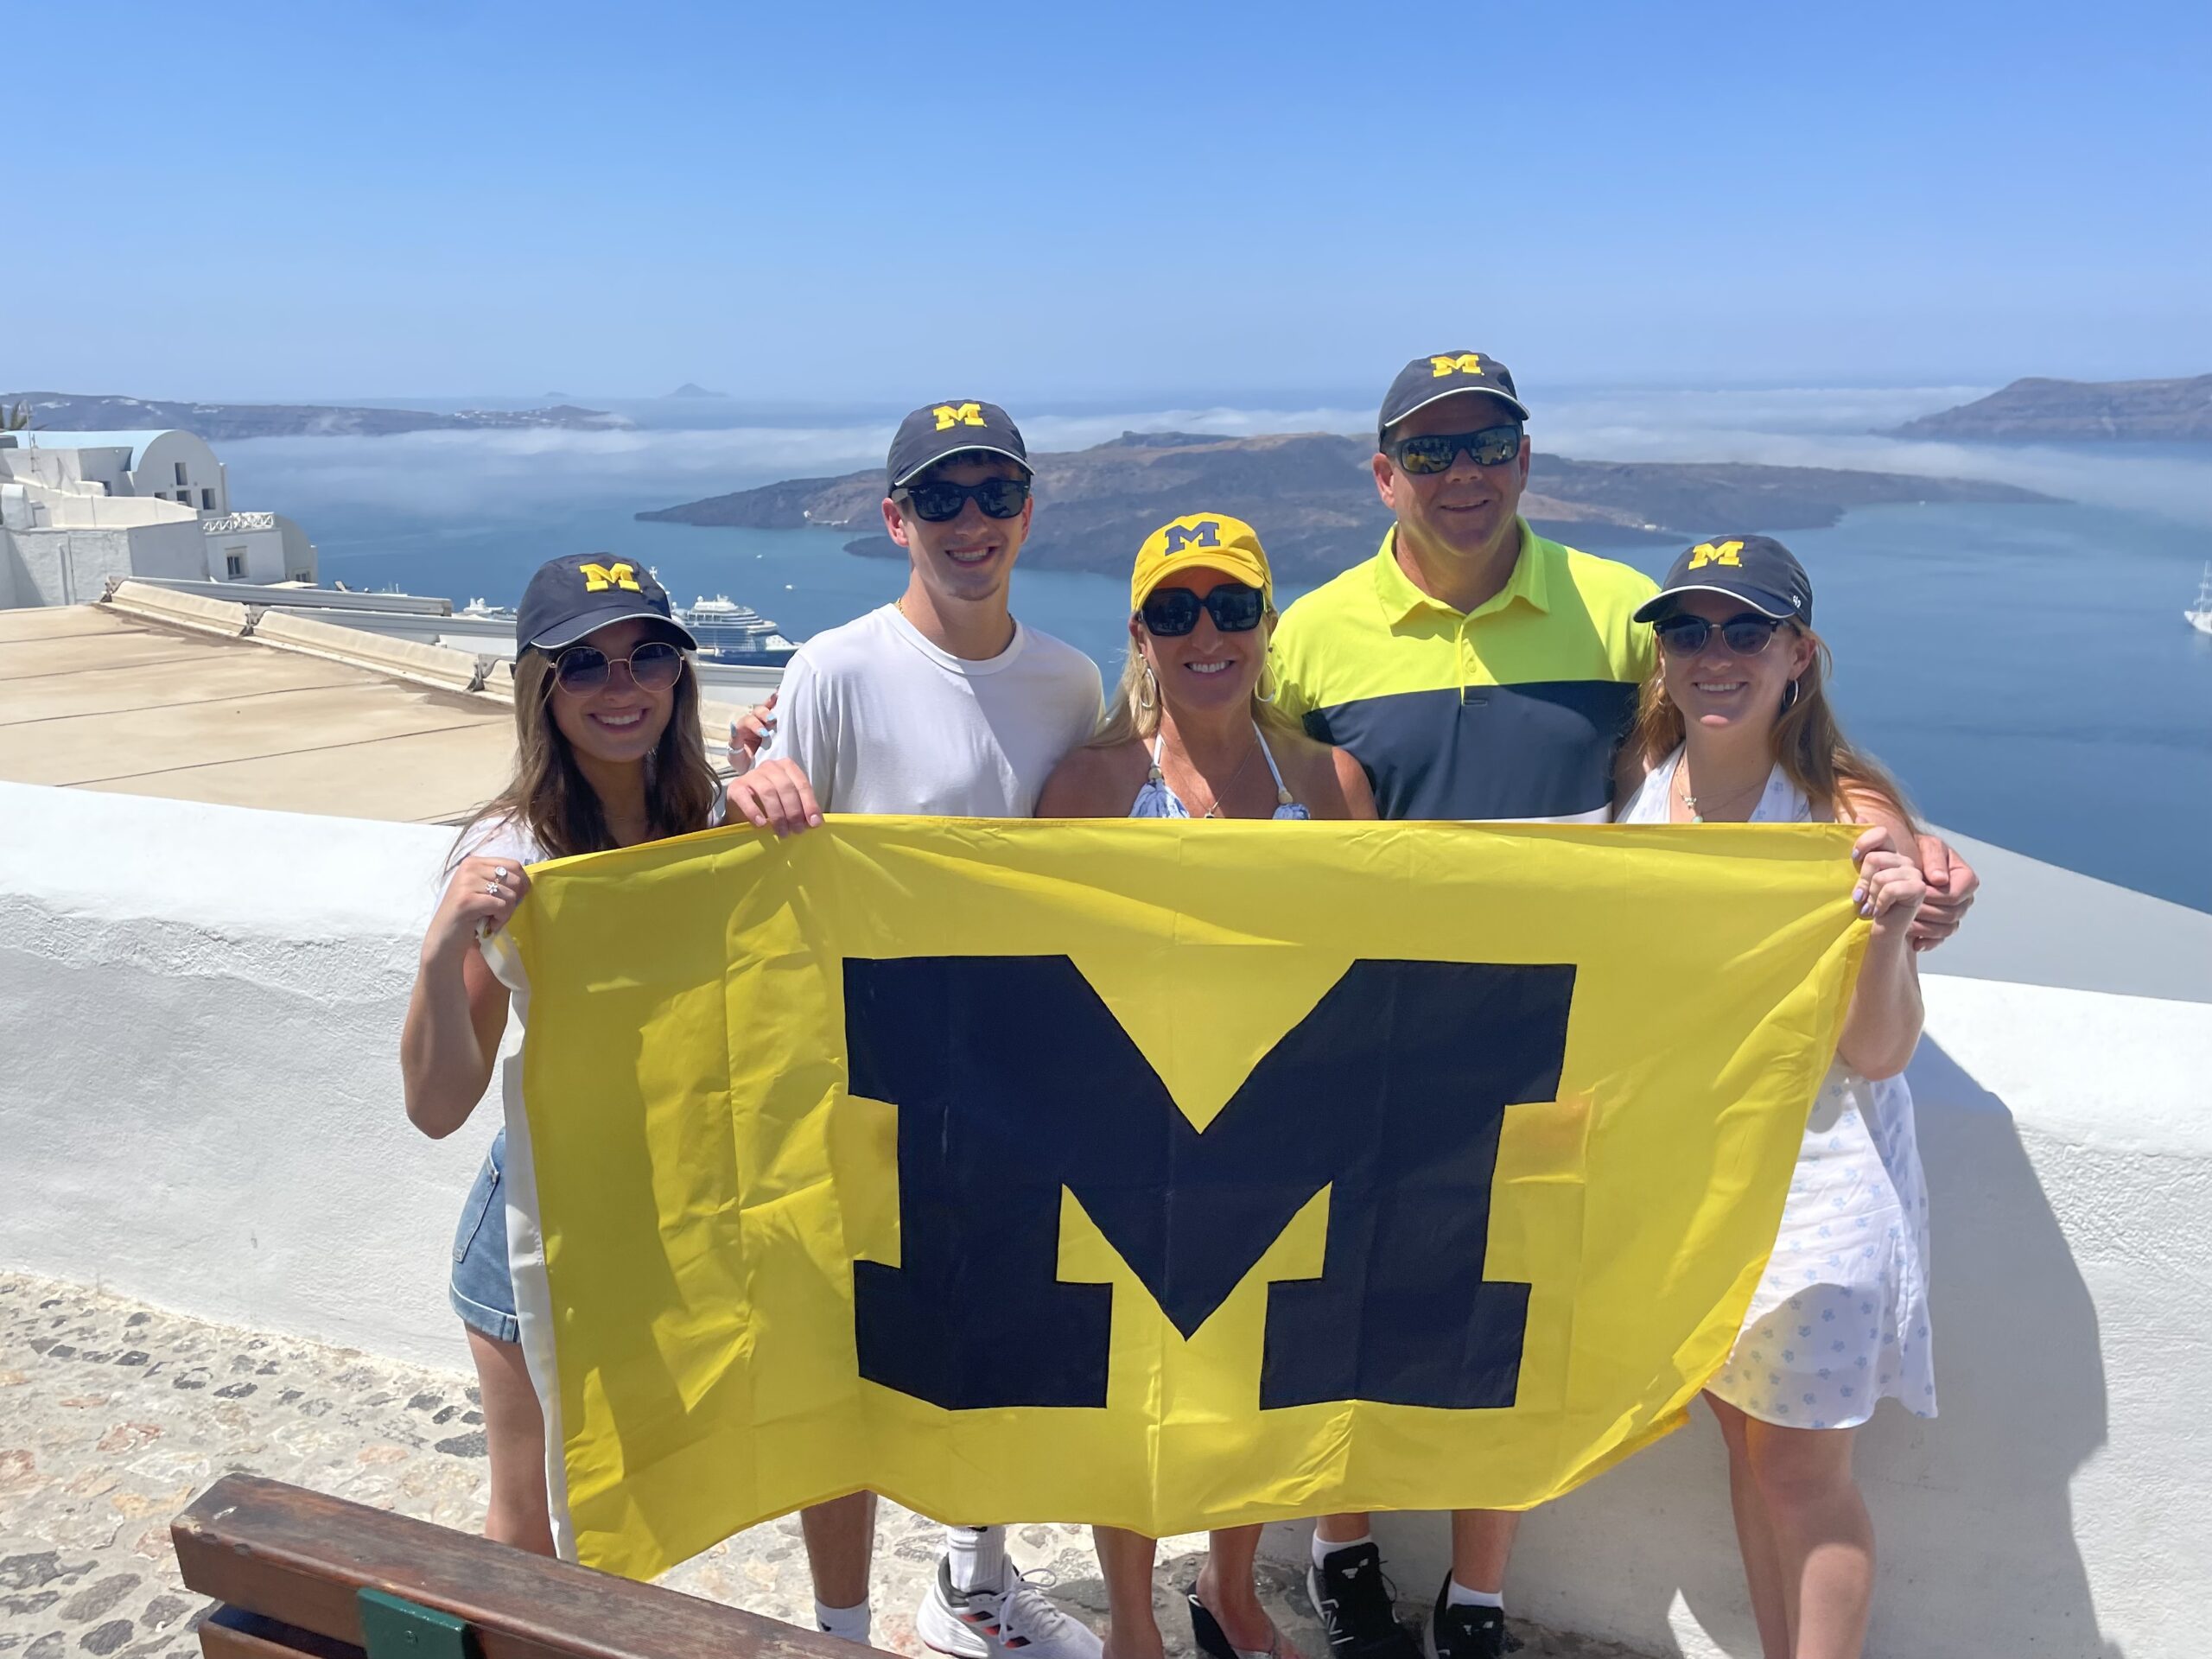 The Lindow clan took pictures all over Europe with the Maize and Blue flag, but this one in Santorini, Greece, was their favorite. From left to right are Madeline; Michael; Jodi, ’92, MBA’98; Todd; and Haley.